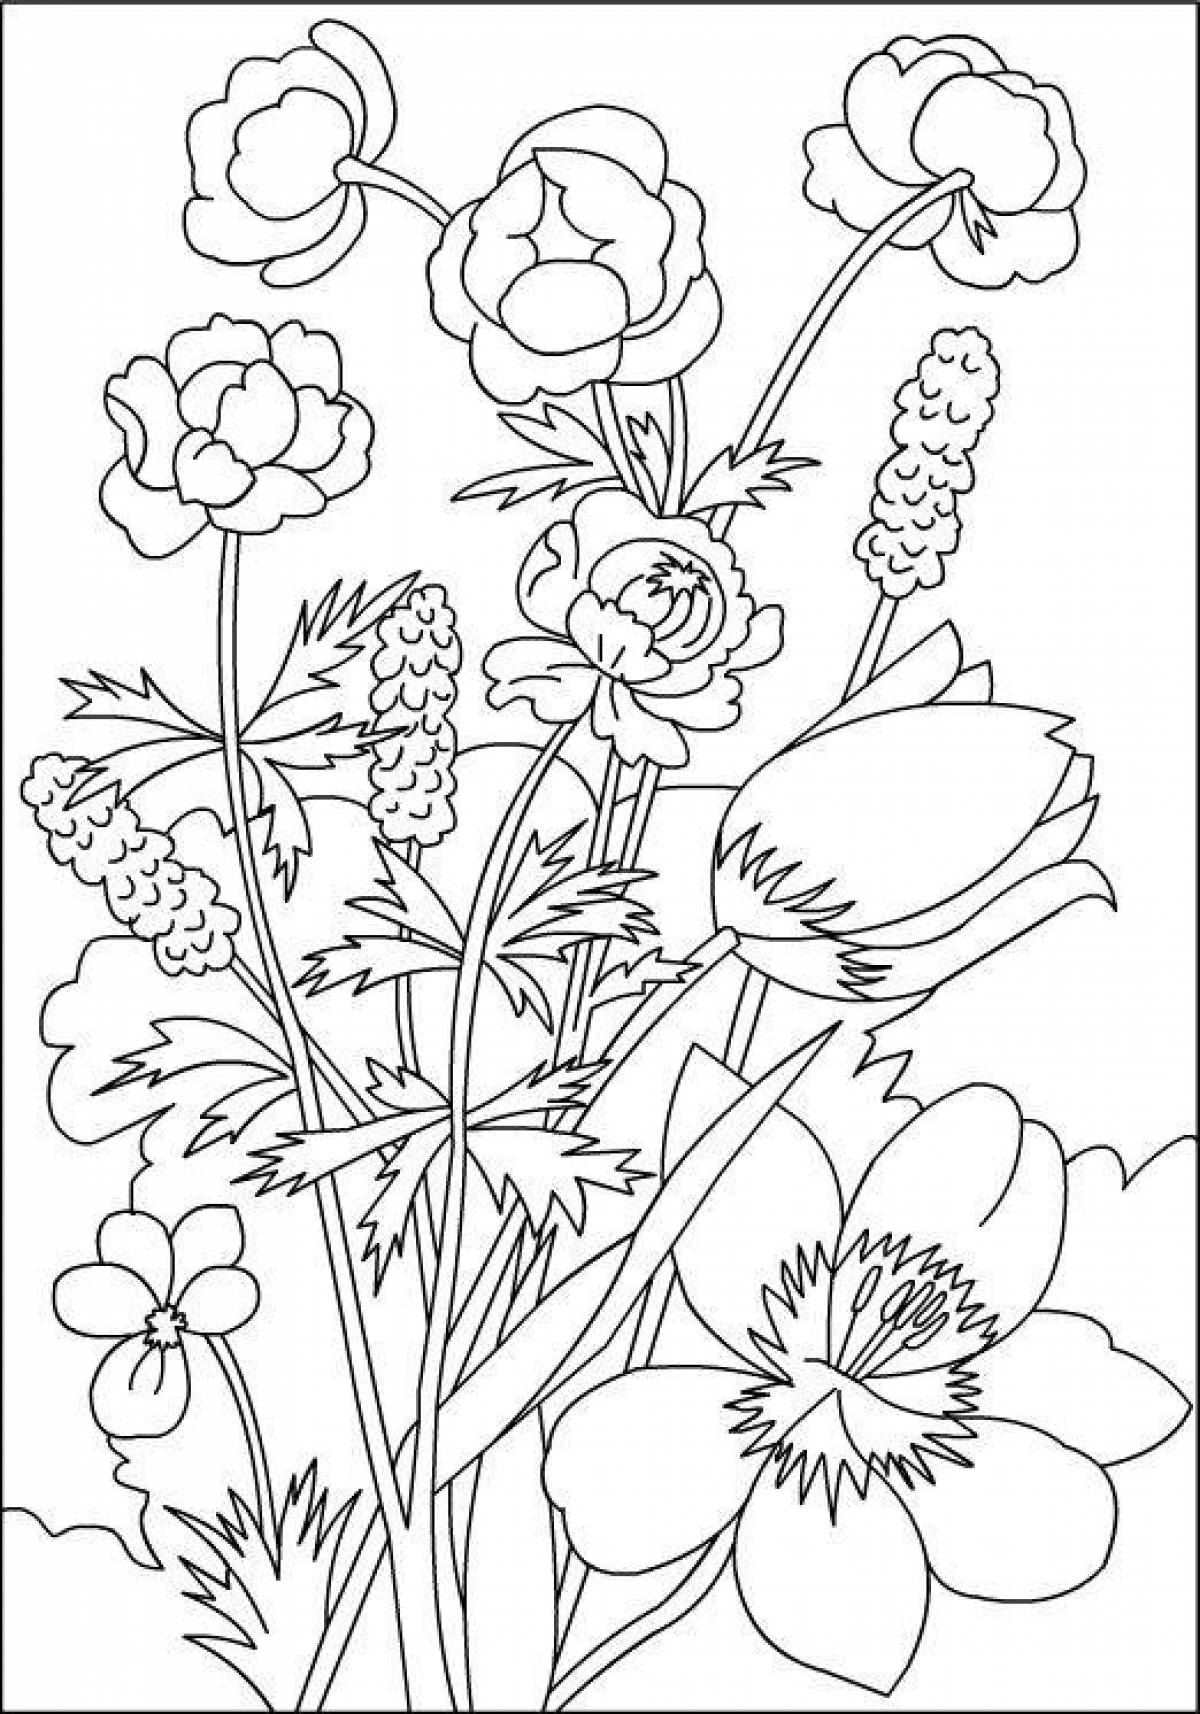 Serene coloring flowers for children 6-7 years old